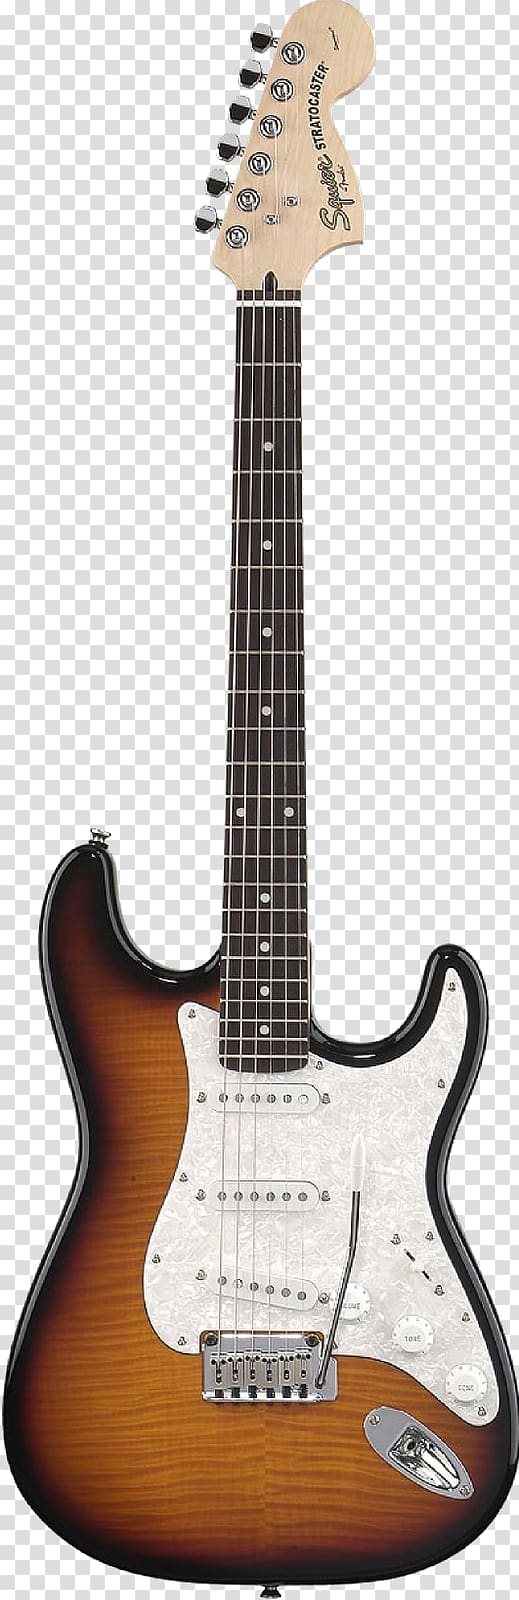 Fender Stratocaster Fender Musical Instruments Corporation Electric guitar Red Hot Chili Peppers, electric guitar transparent background PNG clipart